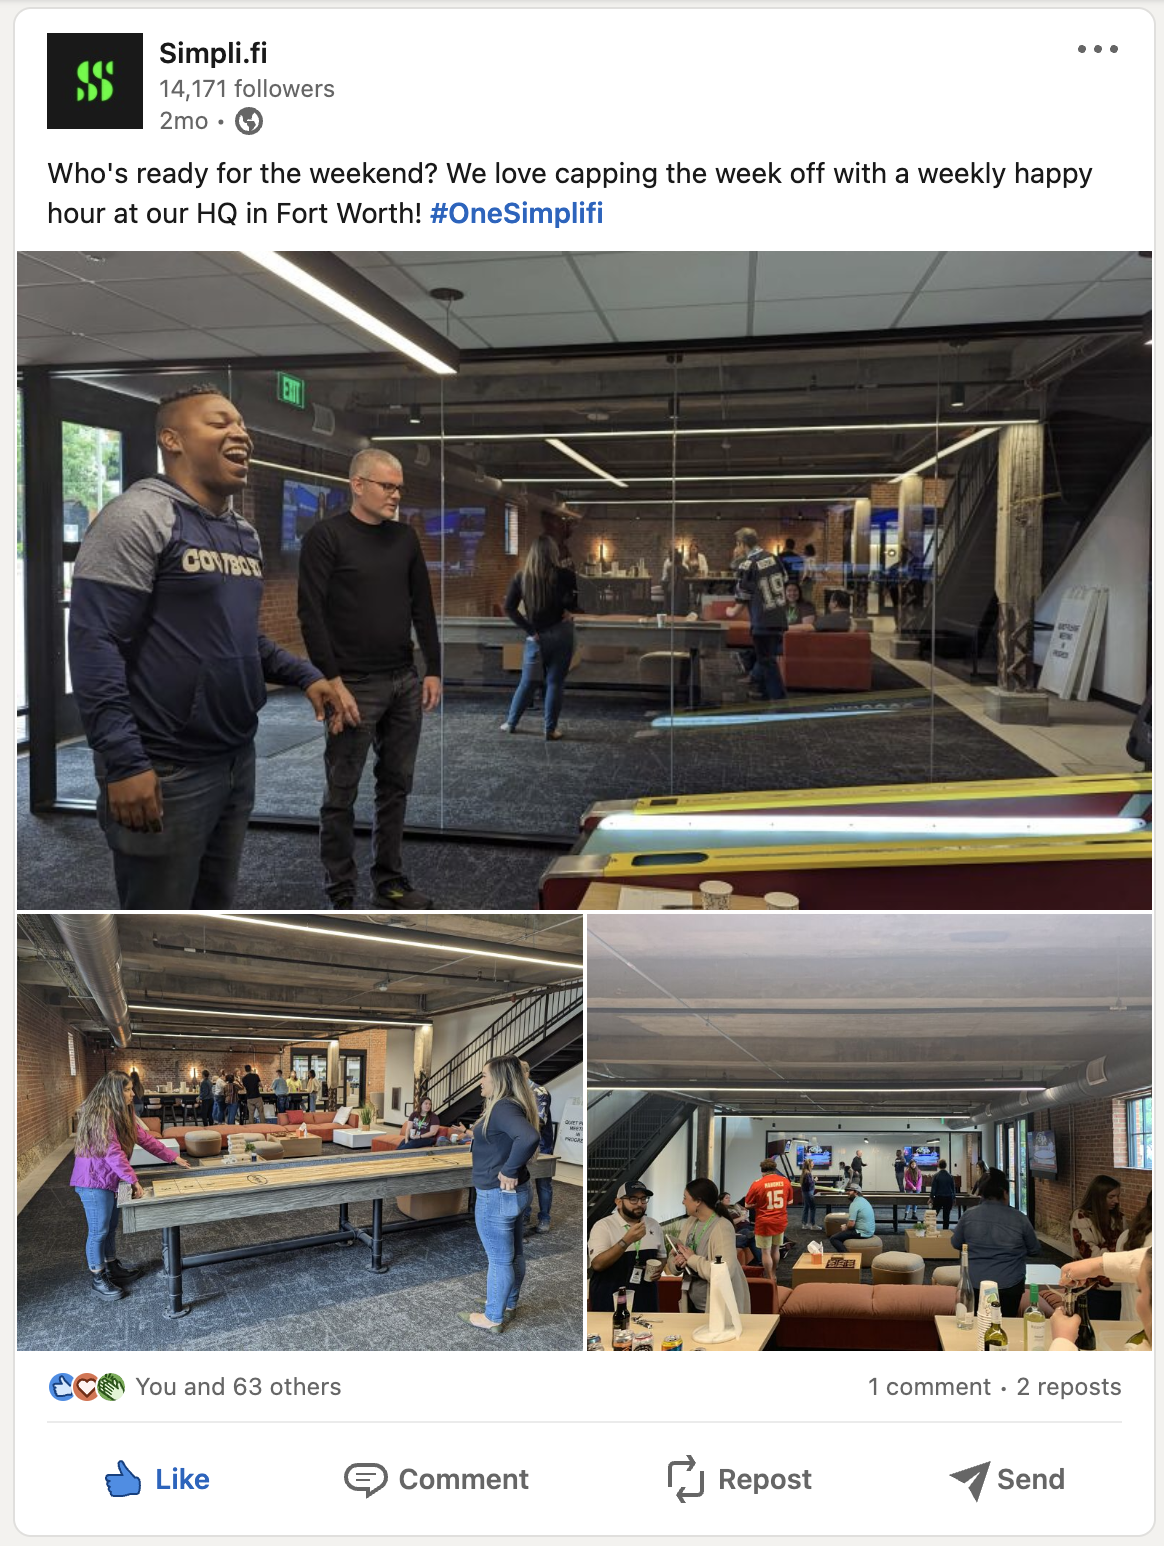 A screenshot of LinkedIn post by Simpli.fi. The caption reads: Who's ready for the weekend? We love capping the week off with a weekly happy hour at our HQ in Fort Worth! Three images of employees playing ski ball, tabletop shuffleboard and socializing at their HQ. 